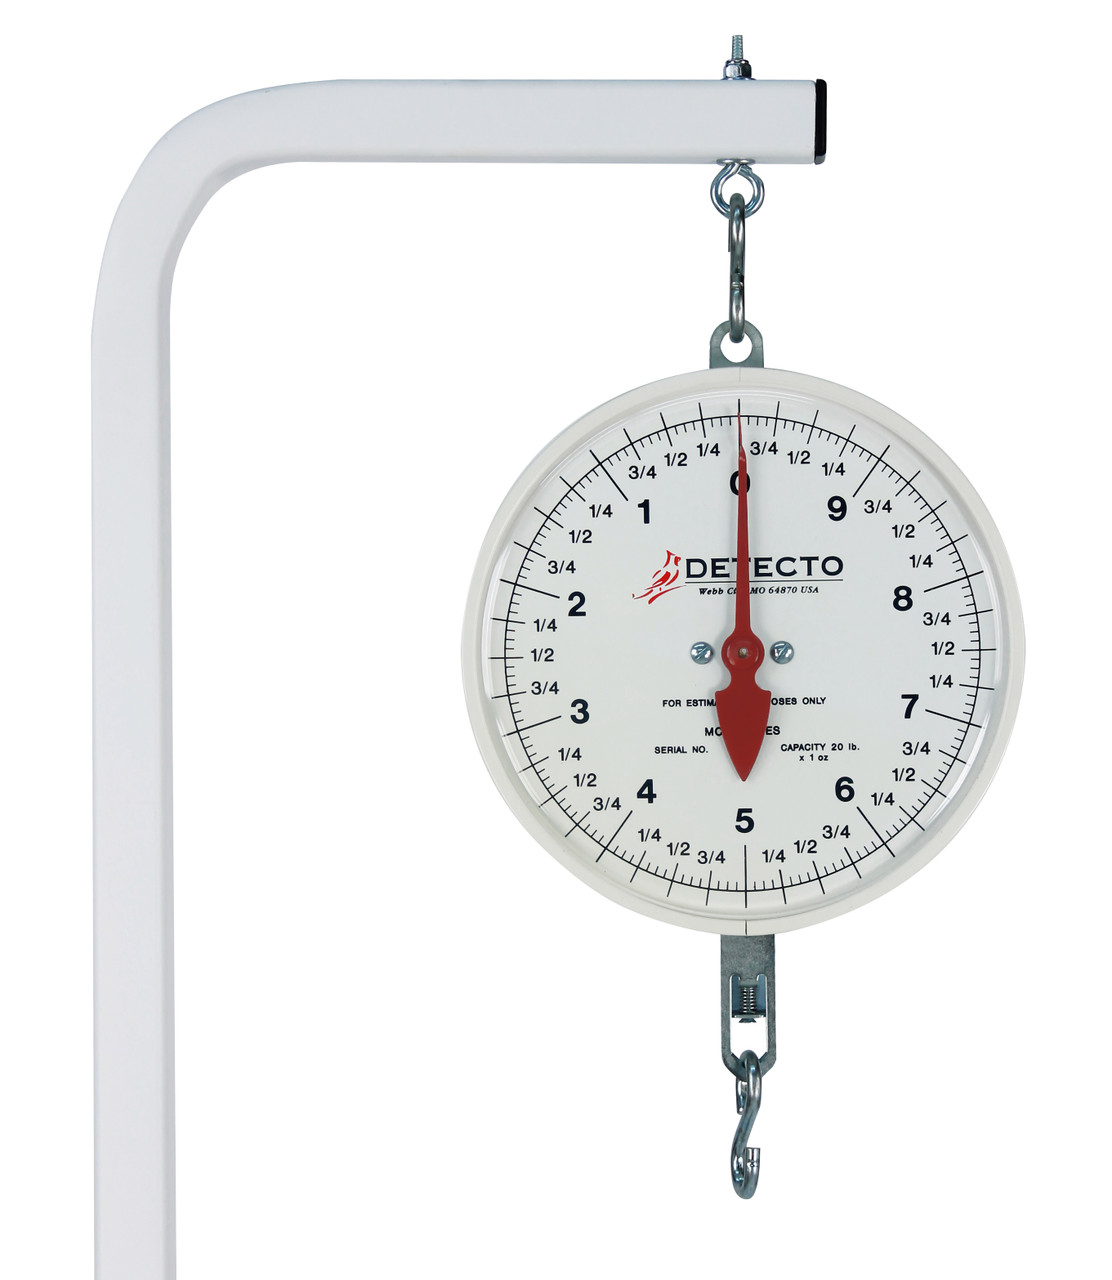 CAS CHS Scale Hand Held Digital Hanging Scale – Sensortronic